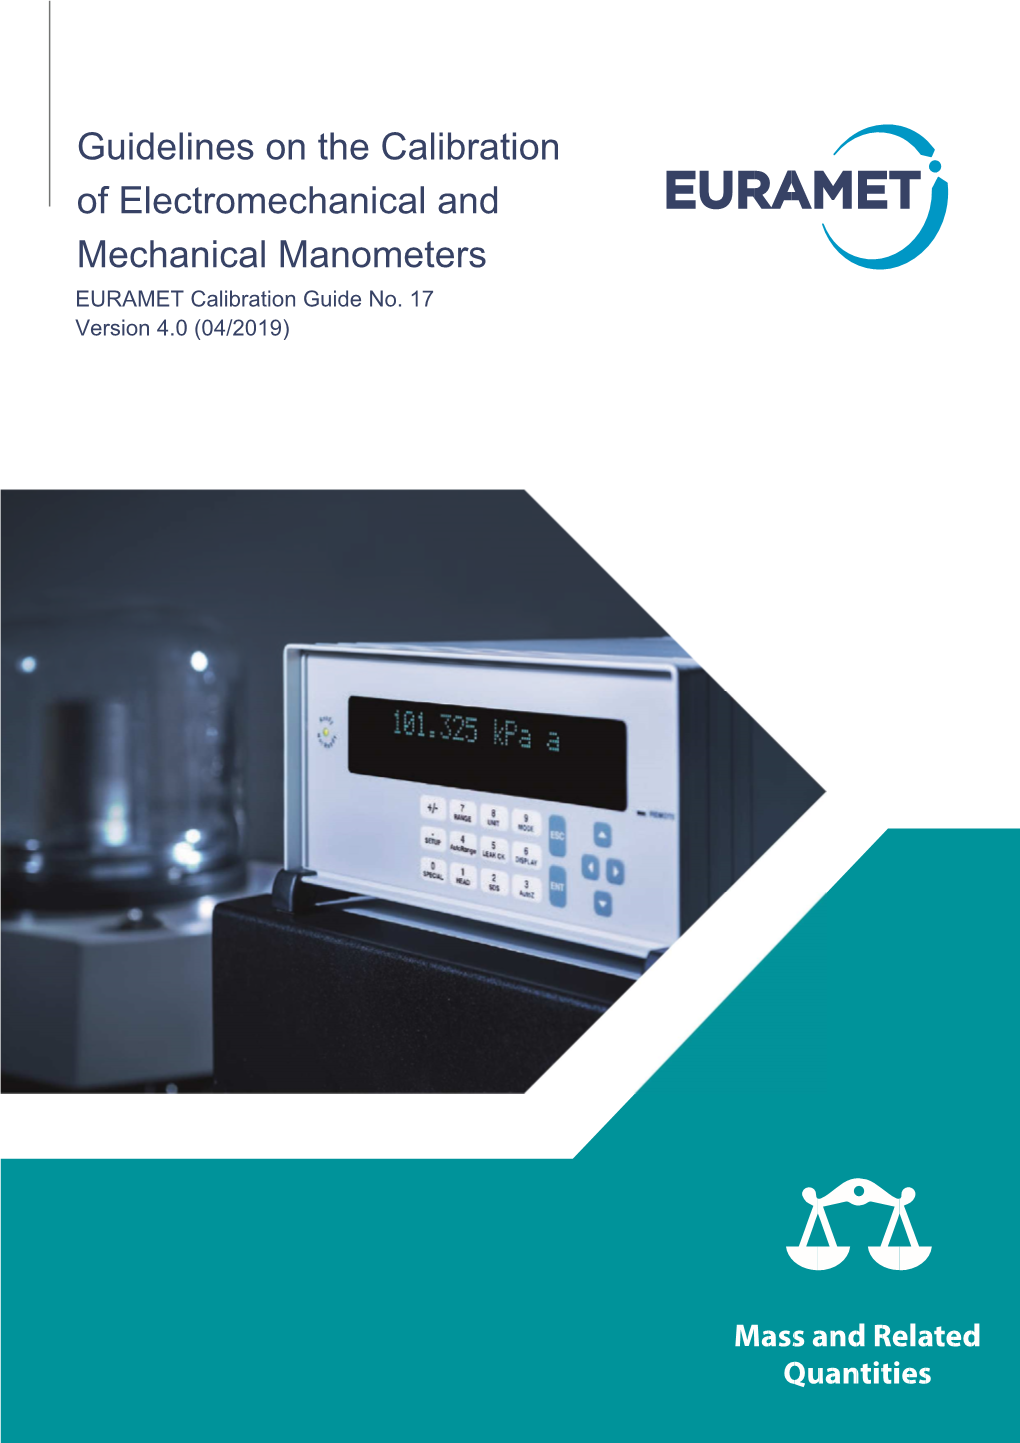 Guidelines on the Calibration of Electromechanical and Mechanical Manometers EURAMET Calibration Guide No